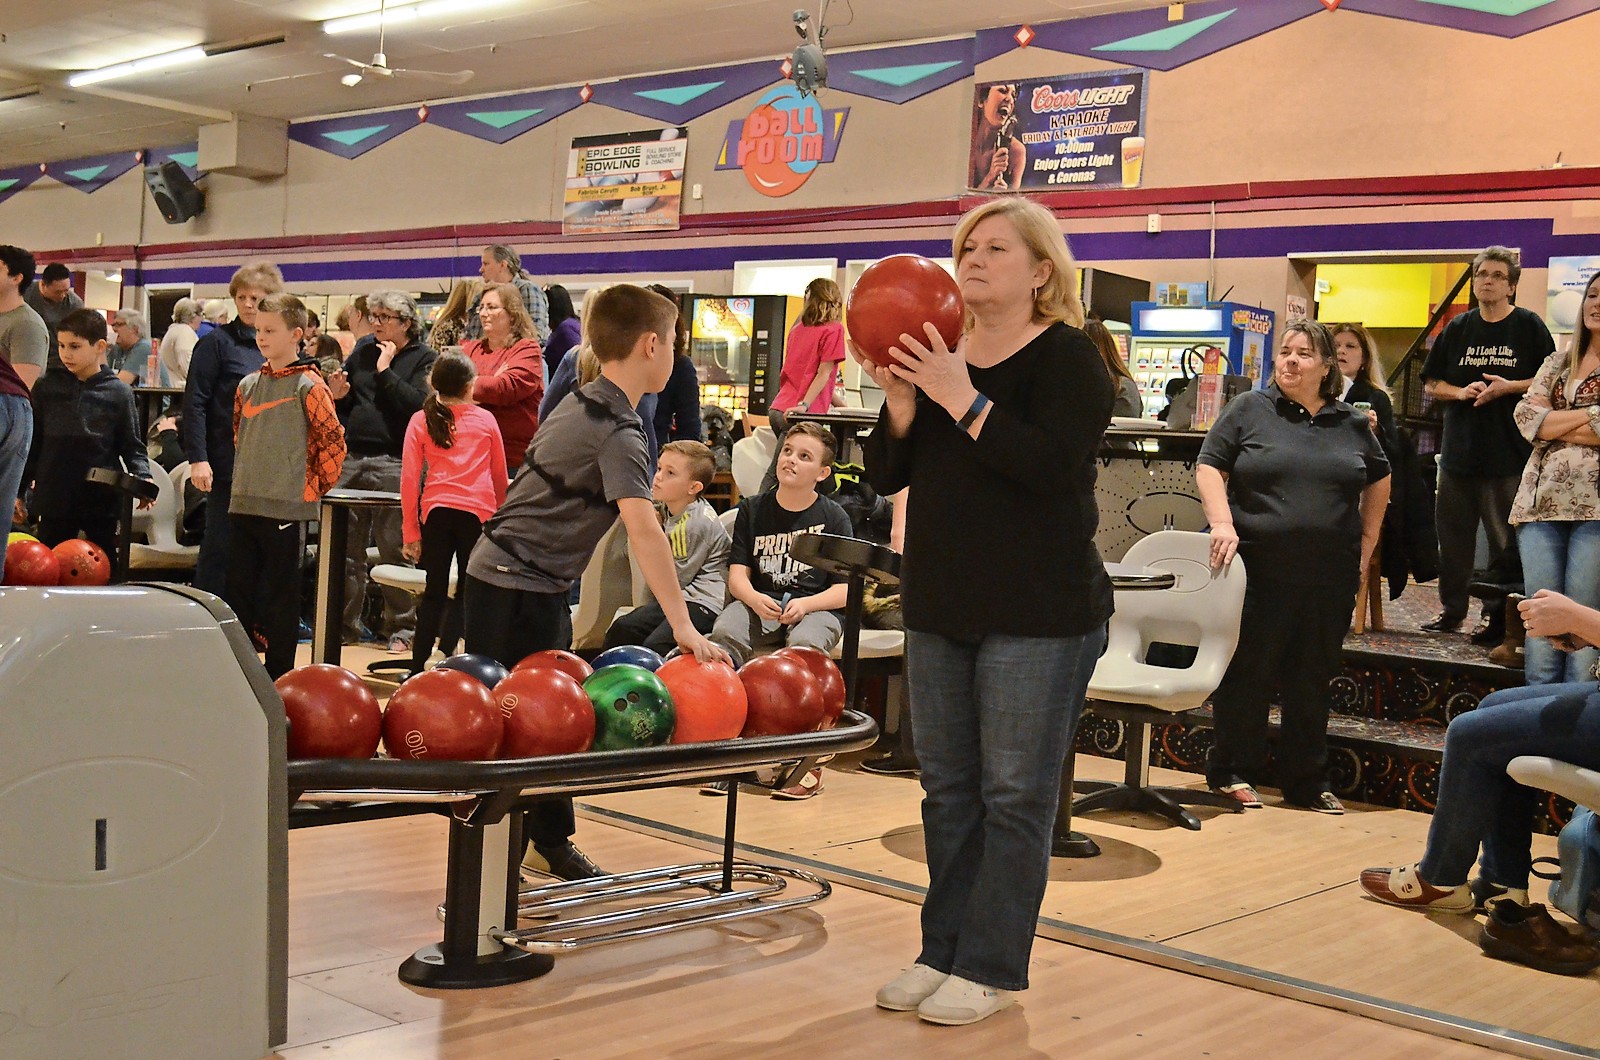 Kathy Cucciniello, of West Islip, concentrated on the pins.